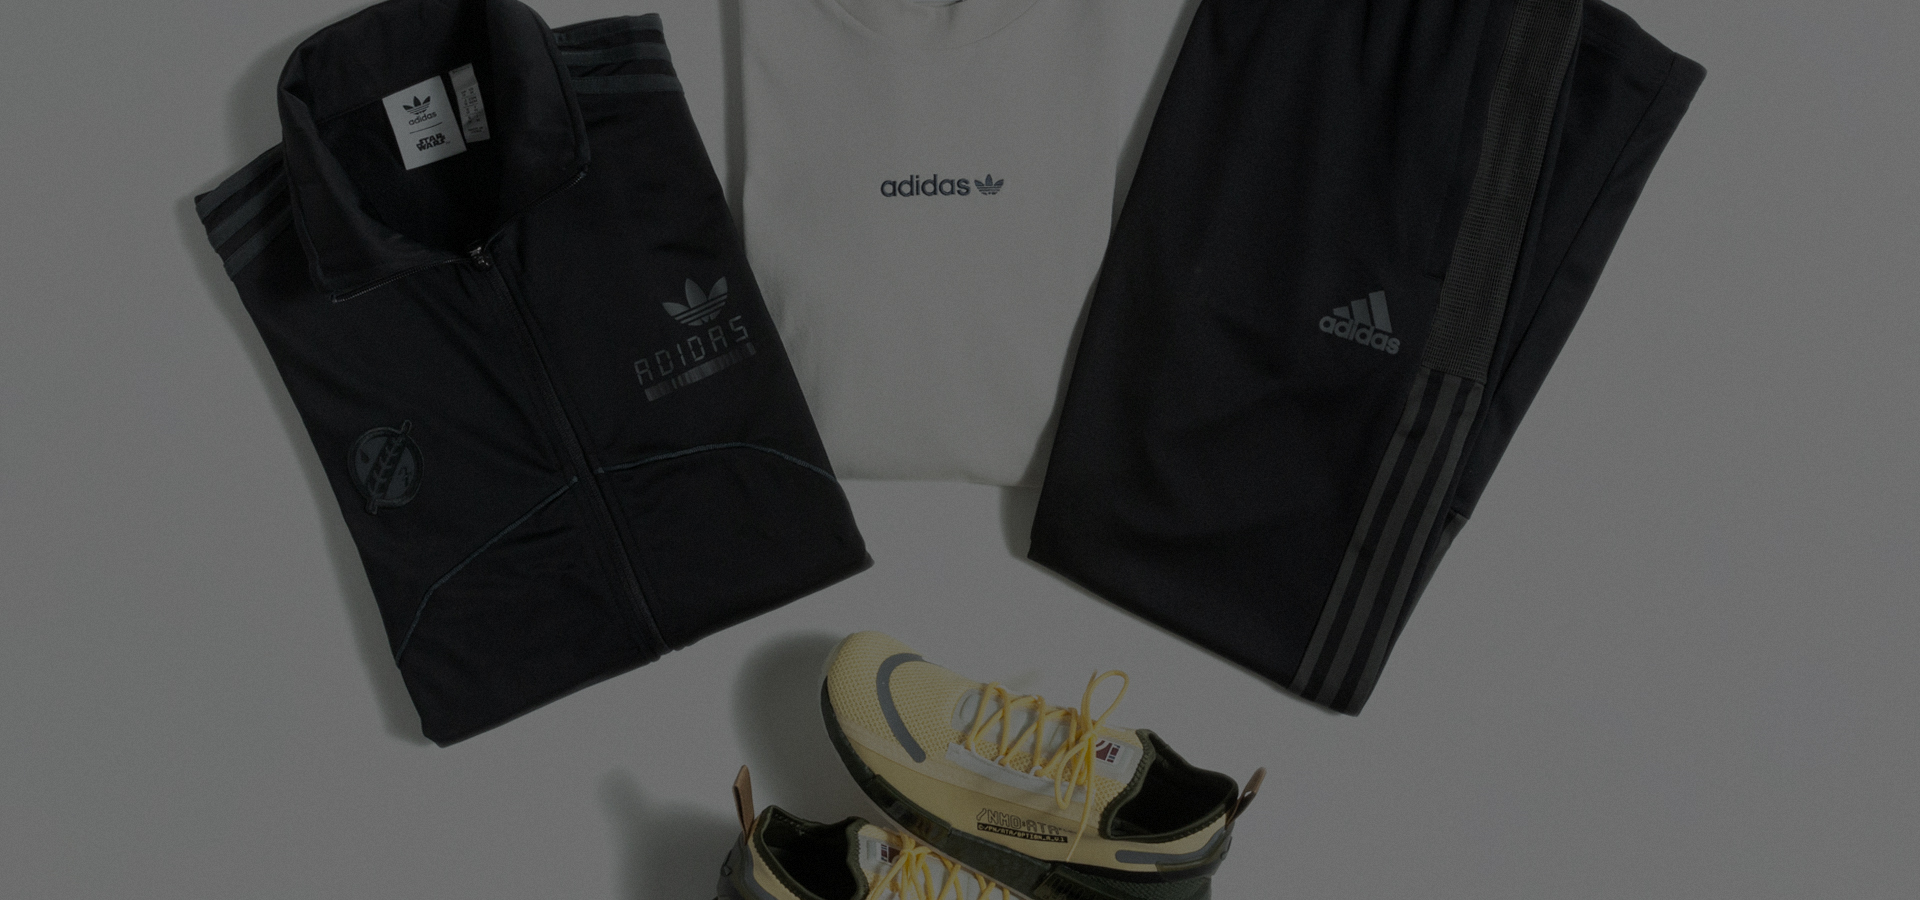 adidas apparel shopping guide march 2022 outfit 2 banner